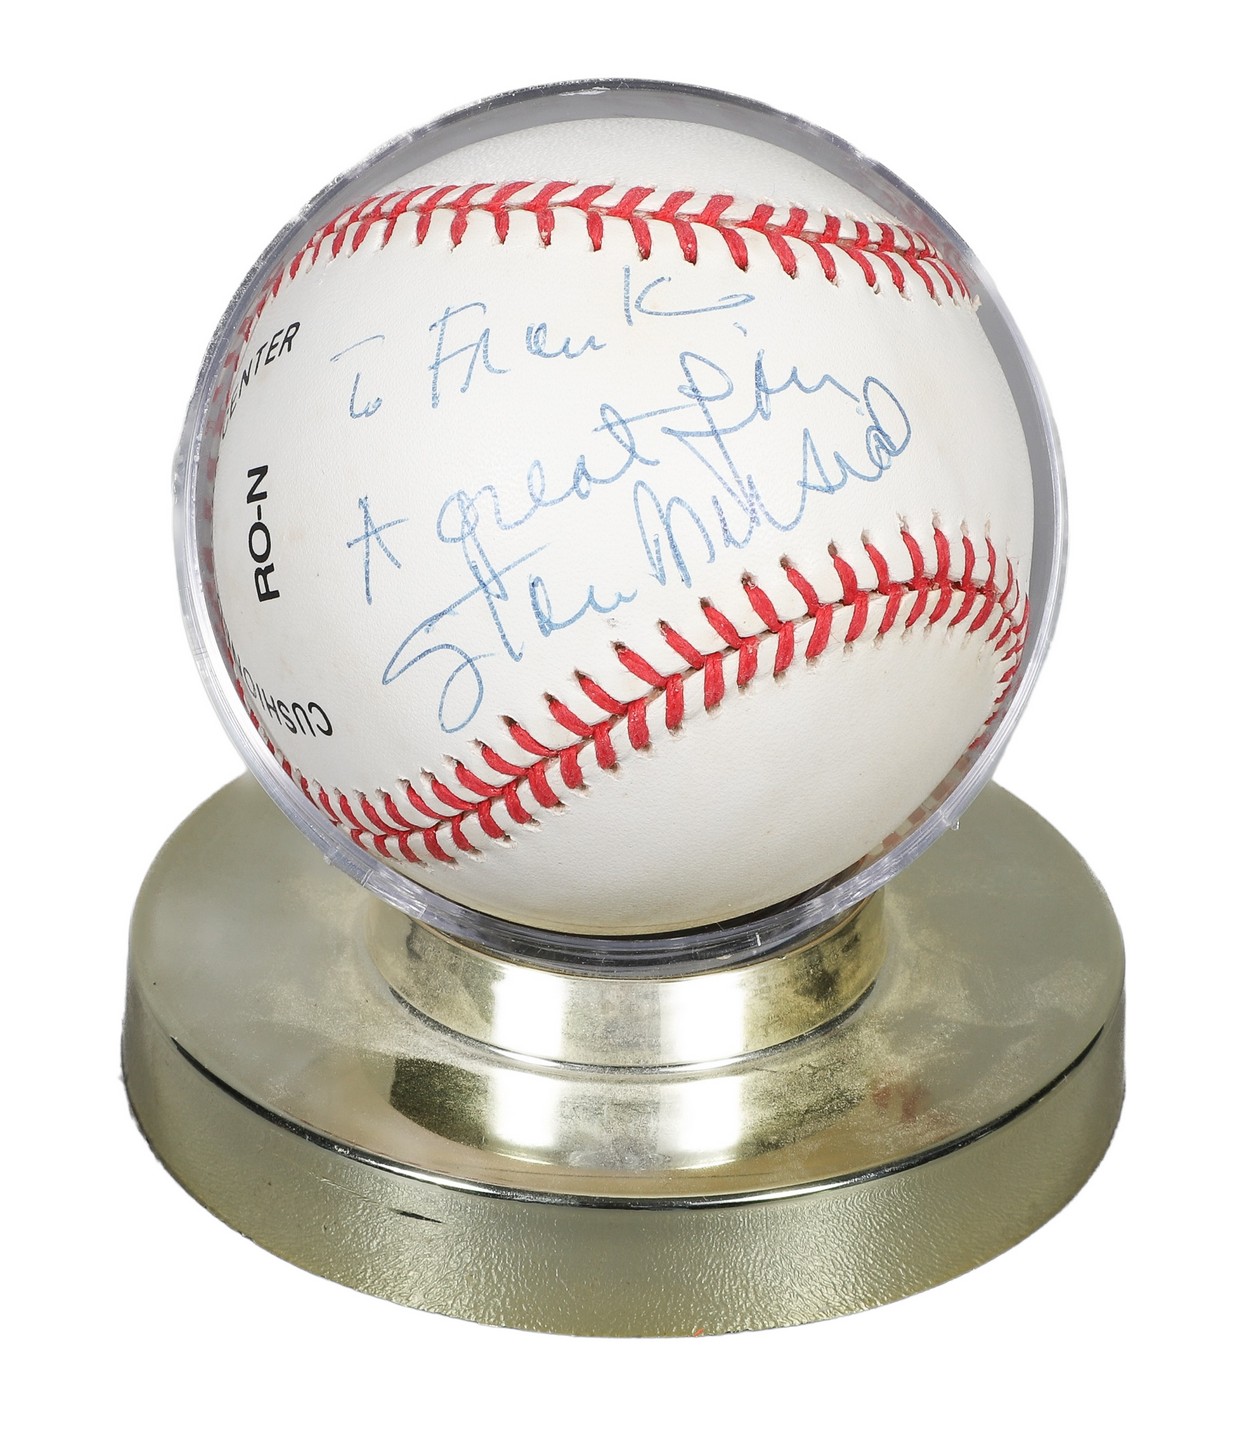 Stan Musial Signed Baseball, official